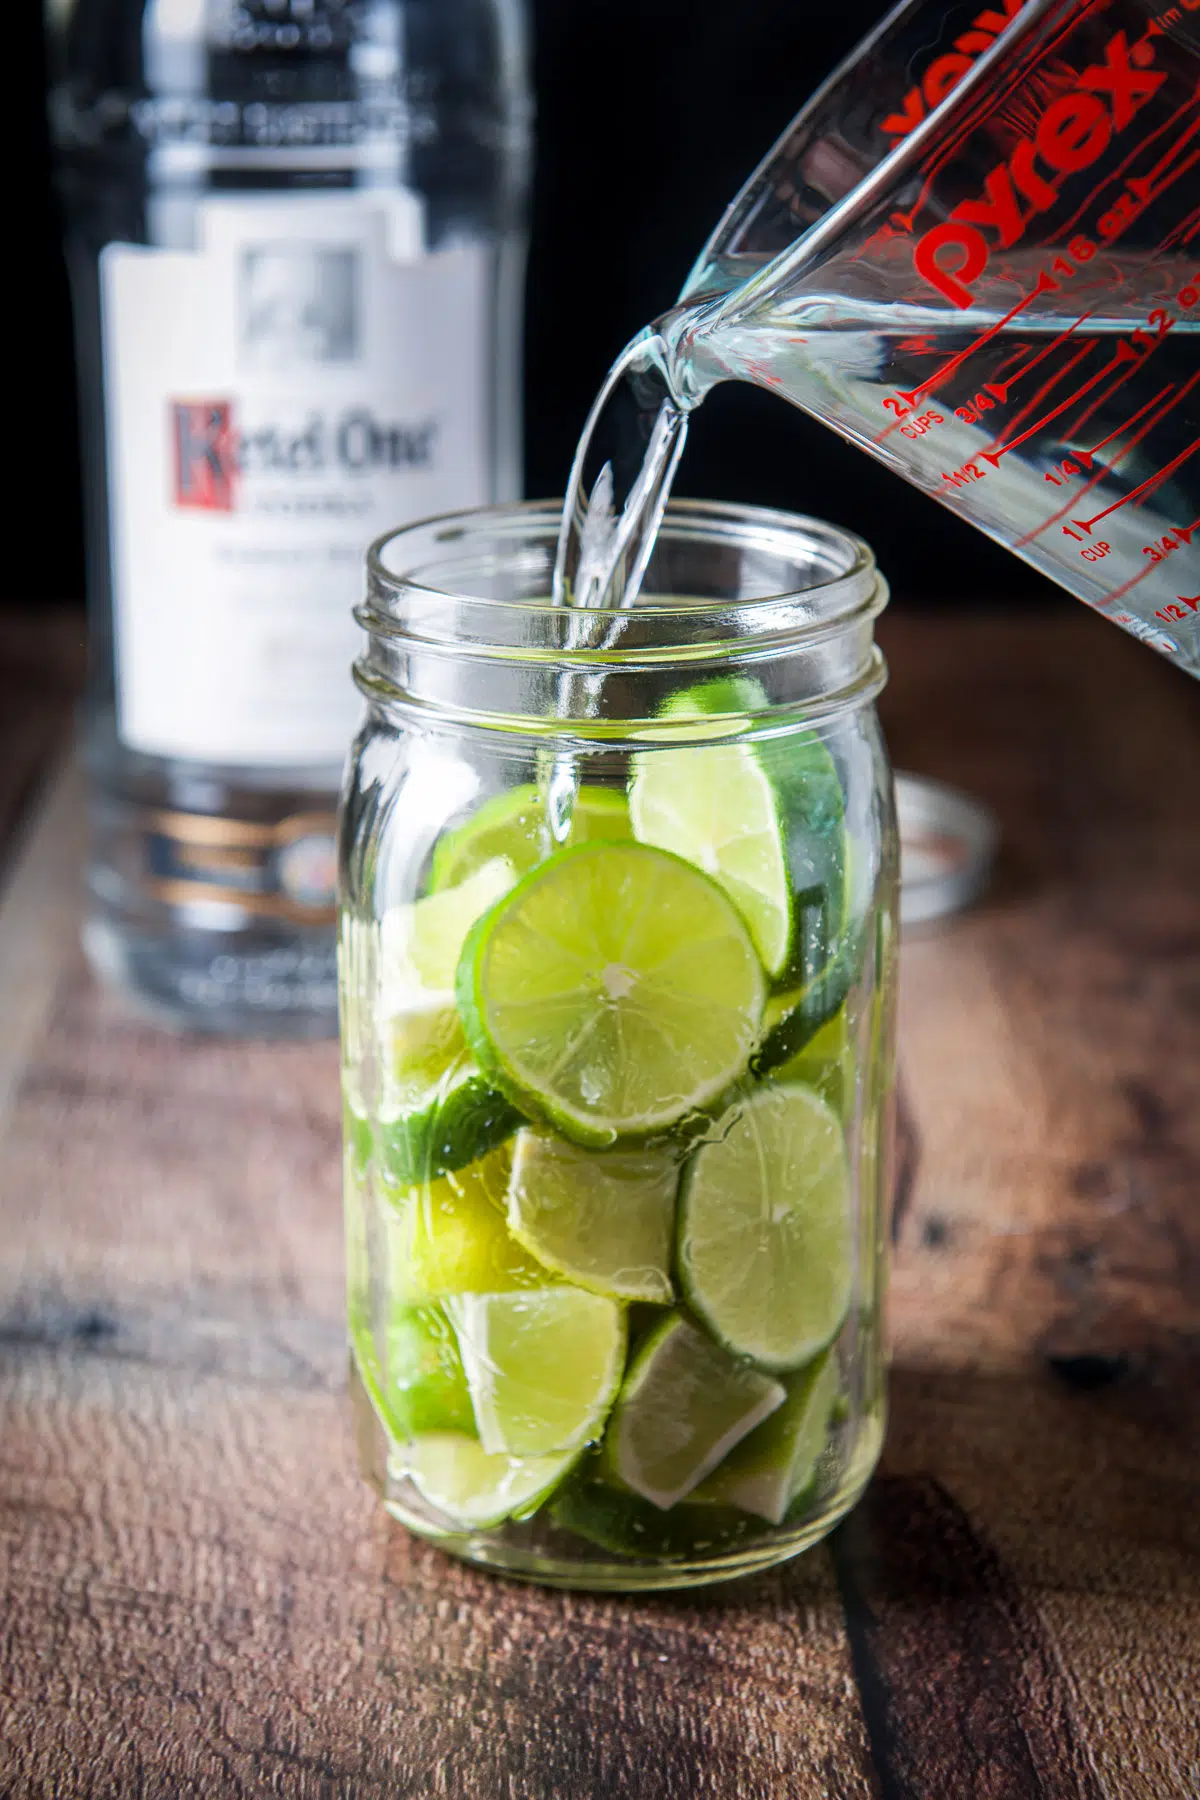 Vodka being poured into a jar of limes